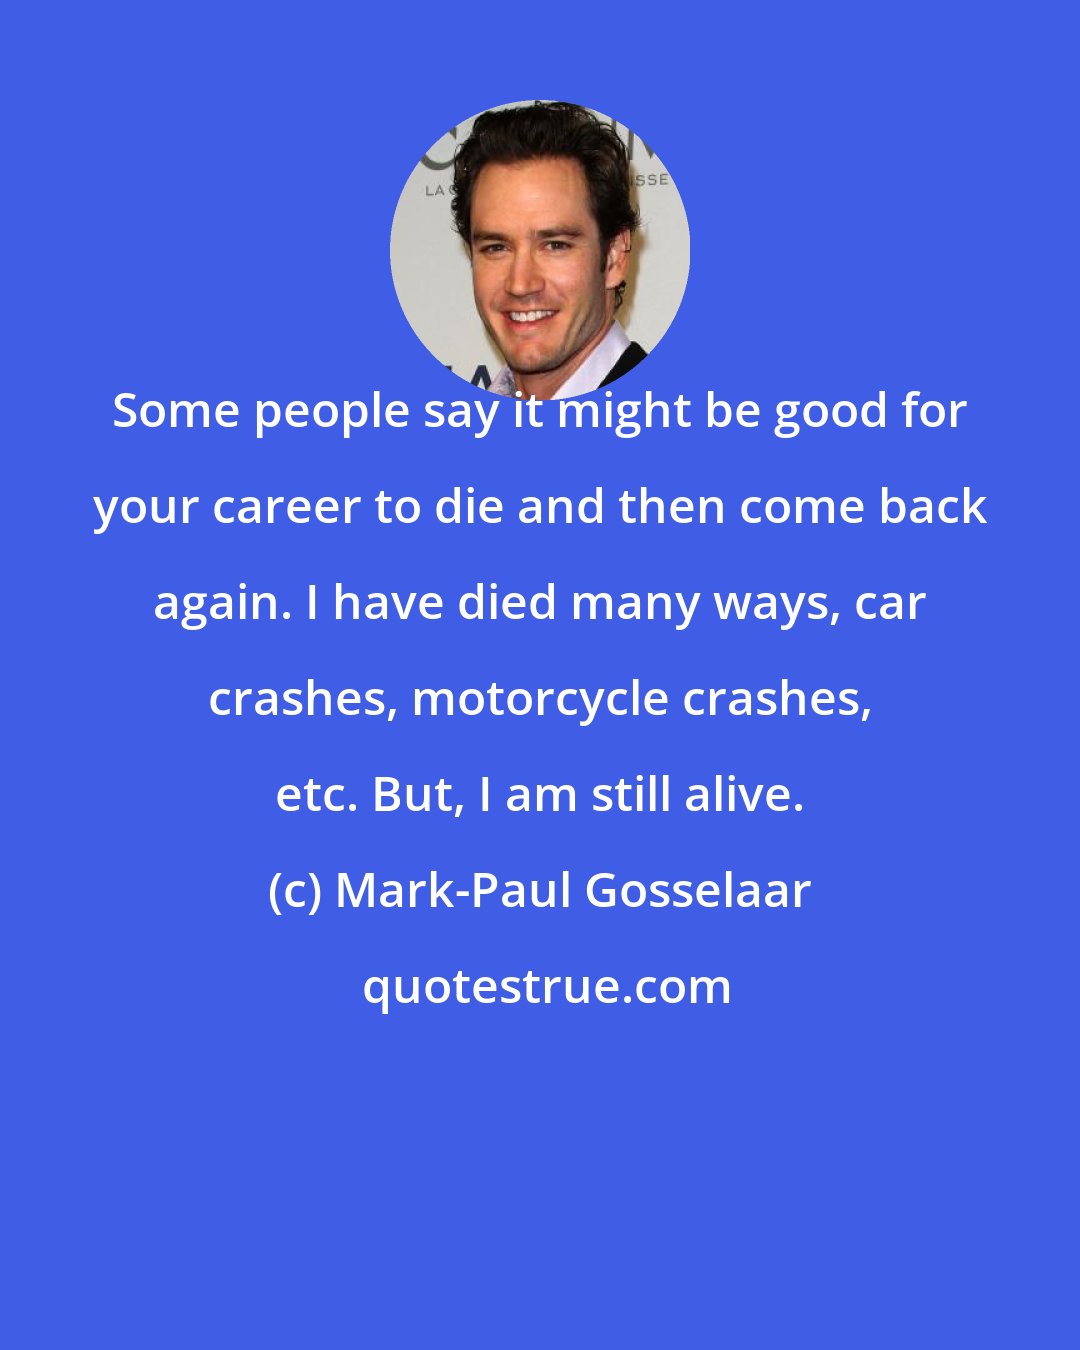 Mark-Paul Gosselaar: Some people say it might be good for your career to die and then come back again. I have died many ways, car crashes, motorcycle crashes, etc. But, I am still alive.